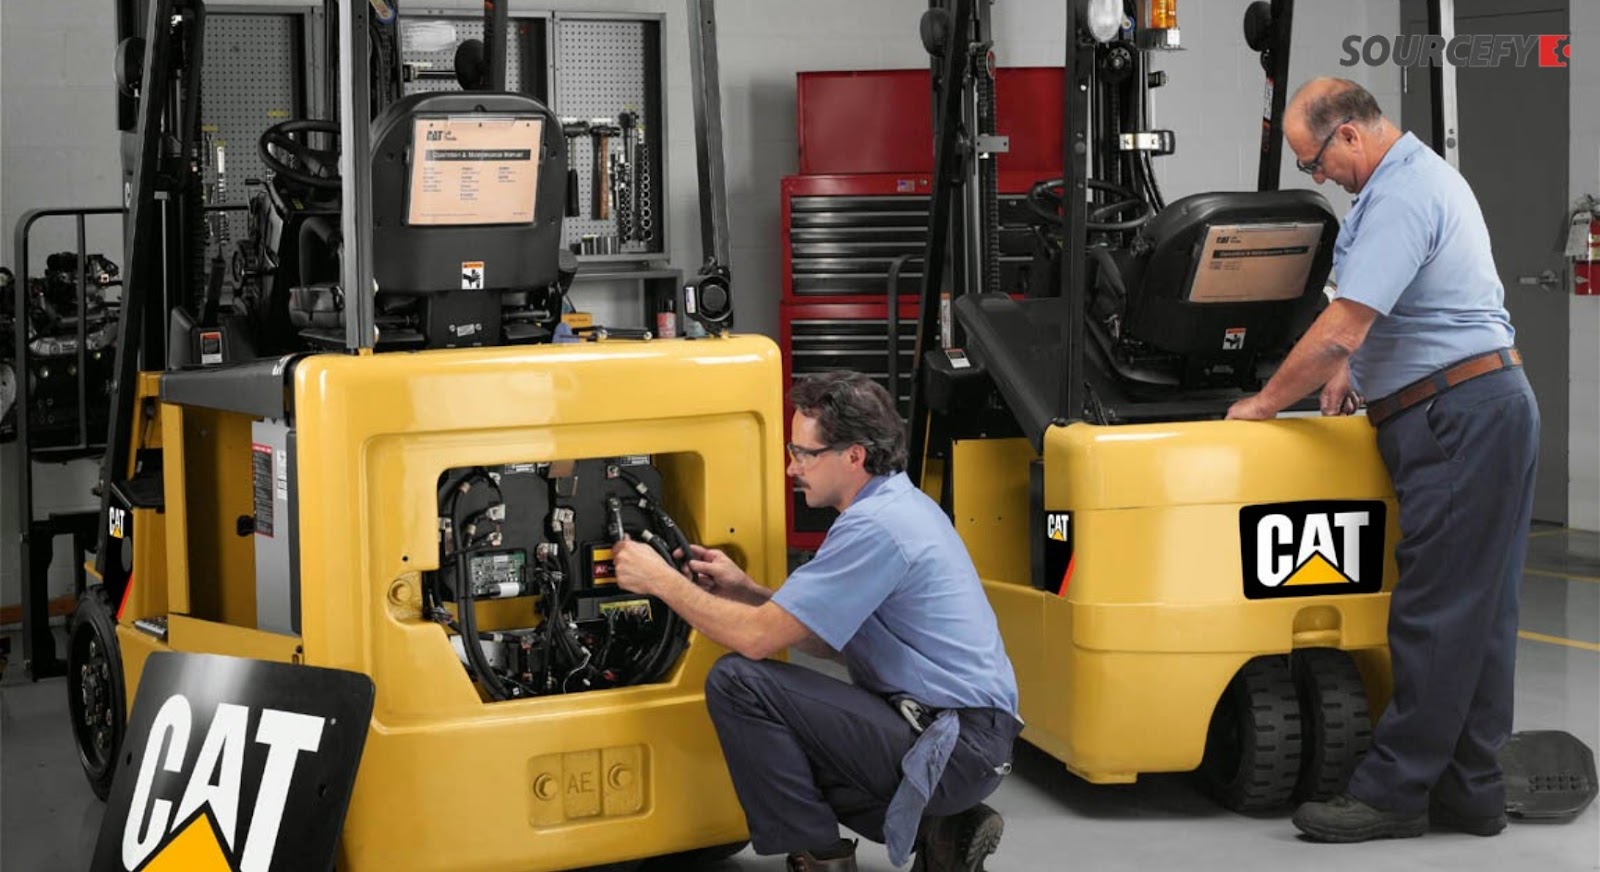 Professional Help for Forklifts